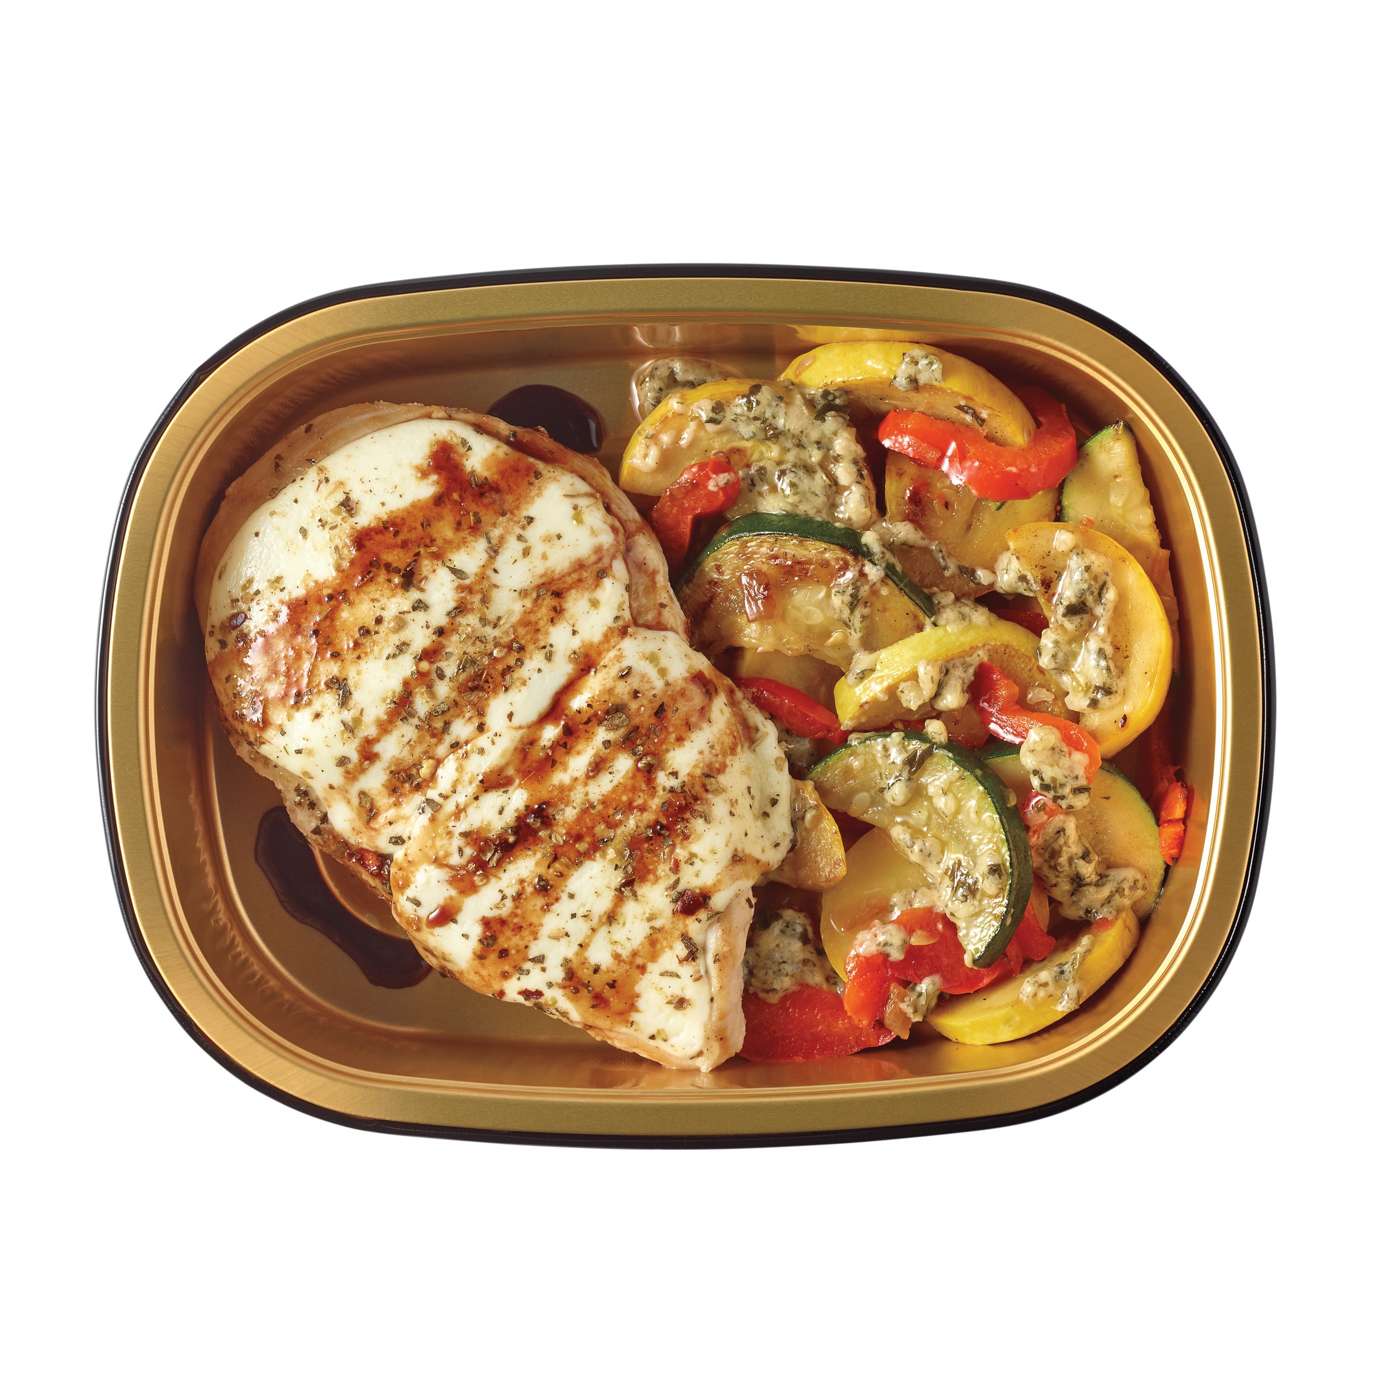 Meal Simple by H-E-B Low-Carb Lifestyle Balsamic Mozzarella Chicken & Squash; image 2 of 3